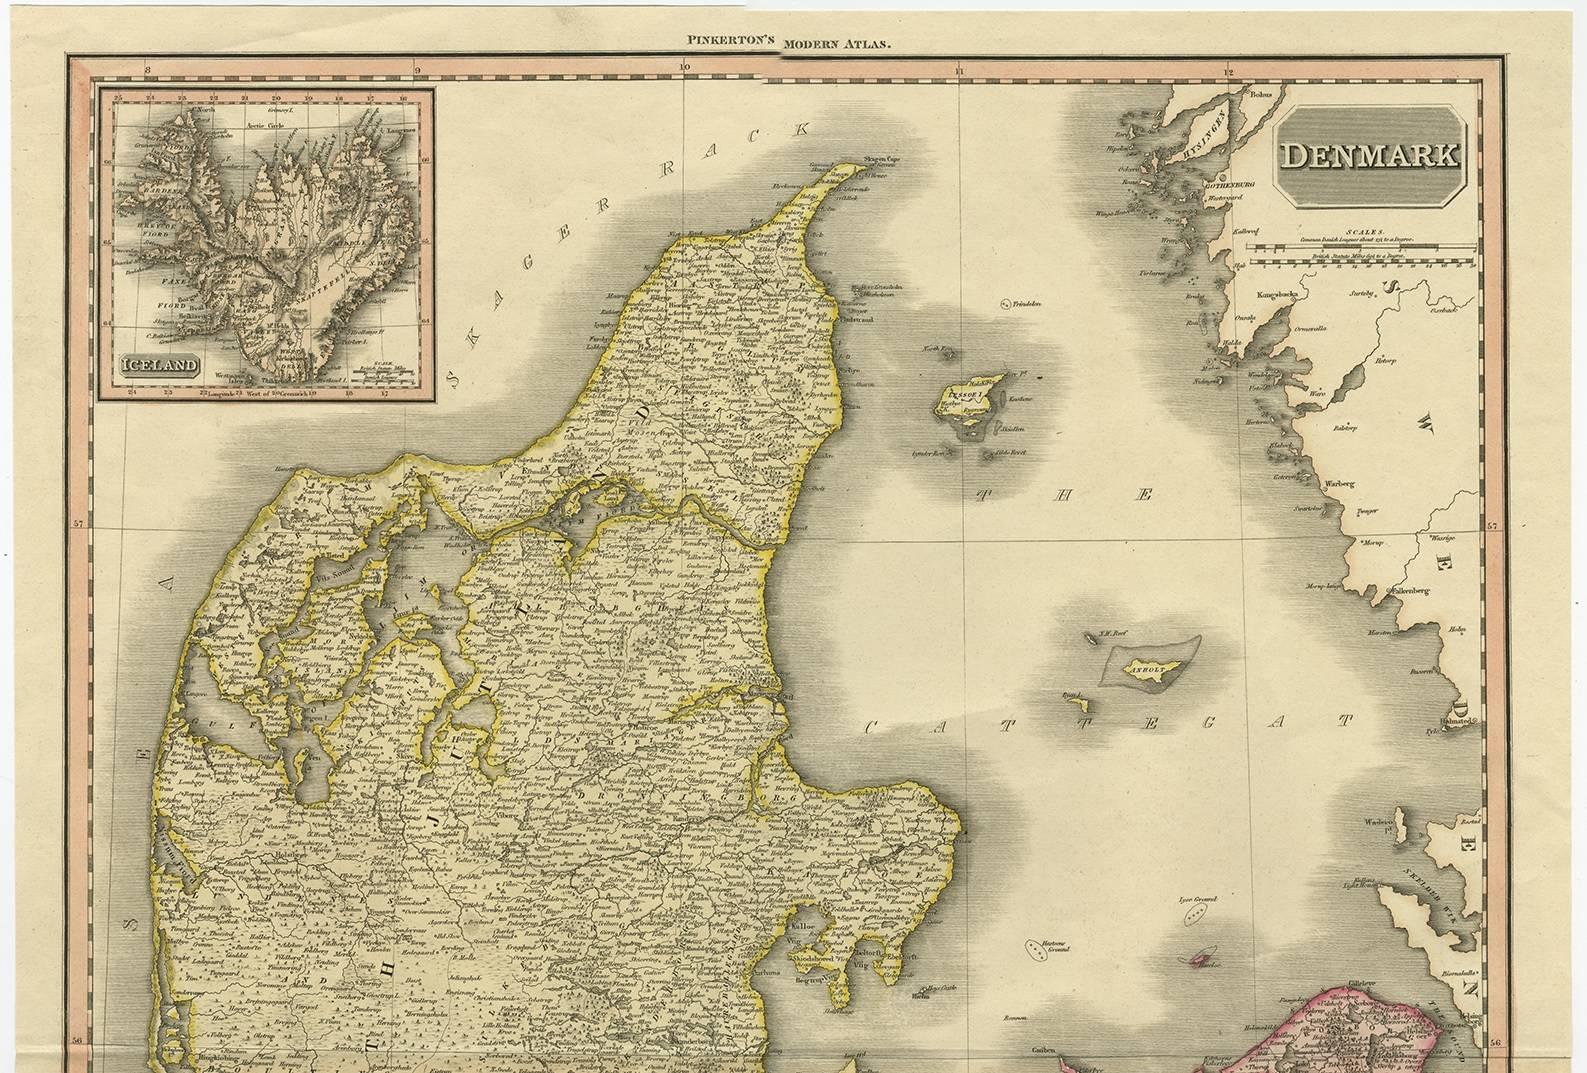 Highly detailed map of Denmark. One of the best large format English atlas maps of the period.
Pinkerton's maps reflect the fine copperplate engraving work being done in the Britain at the beginning of the 19th century, with remarkable detail and a